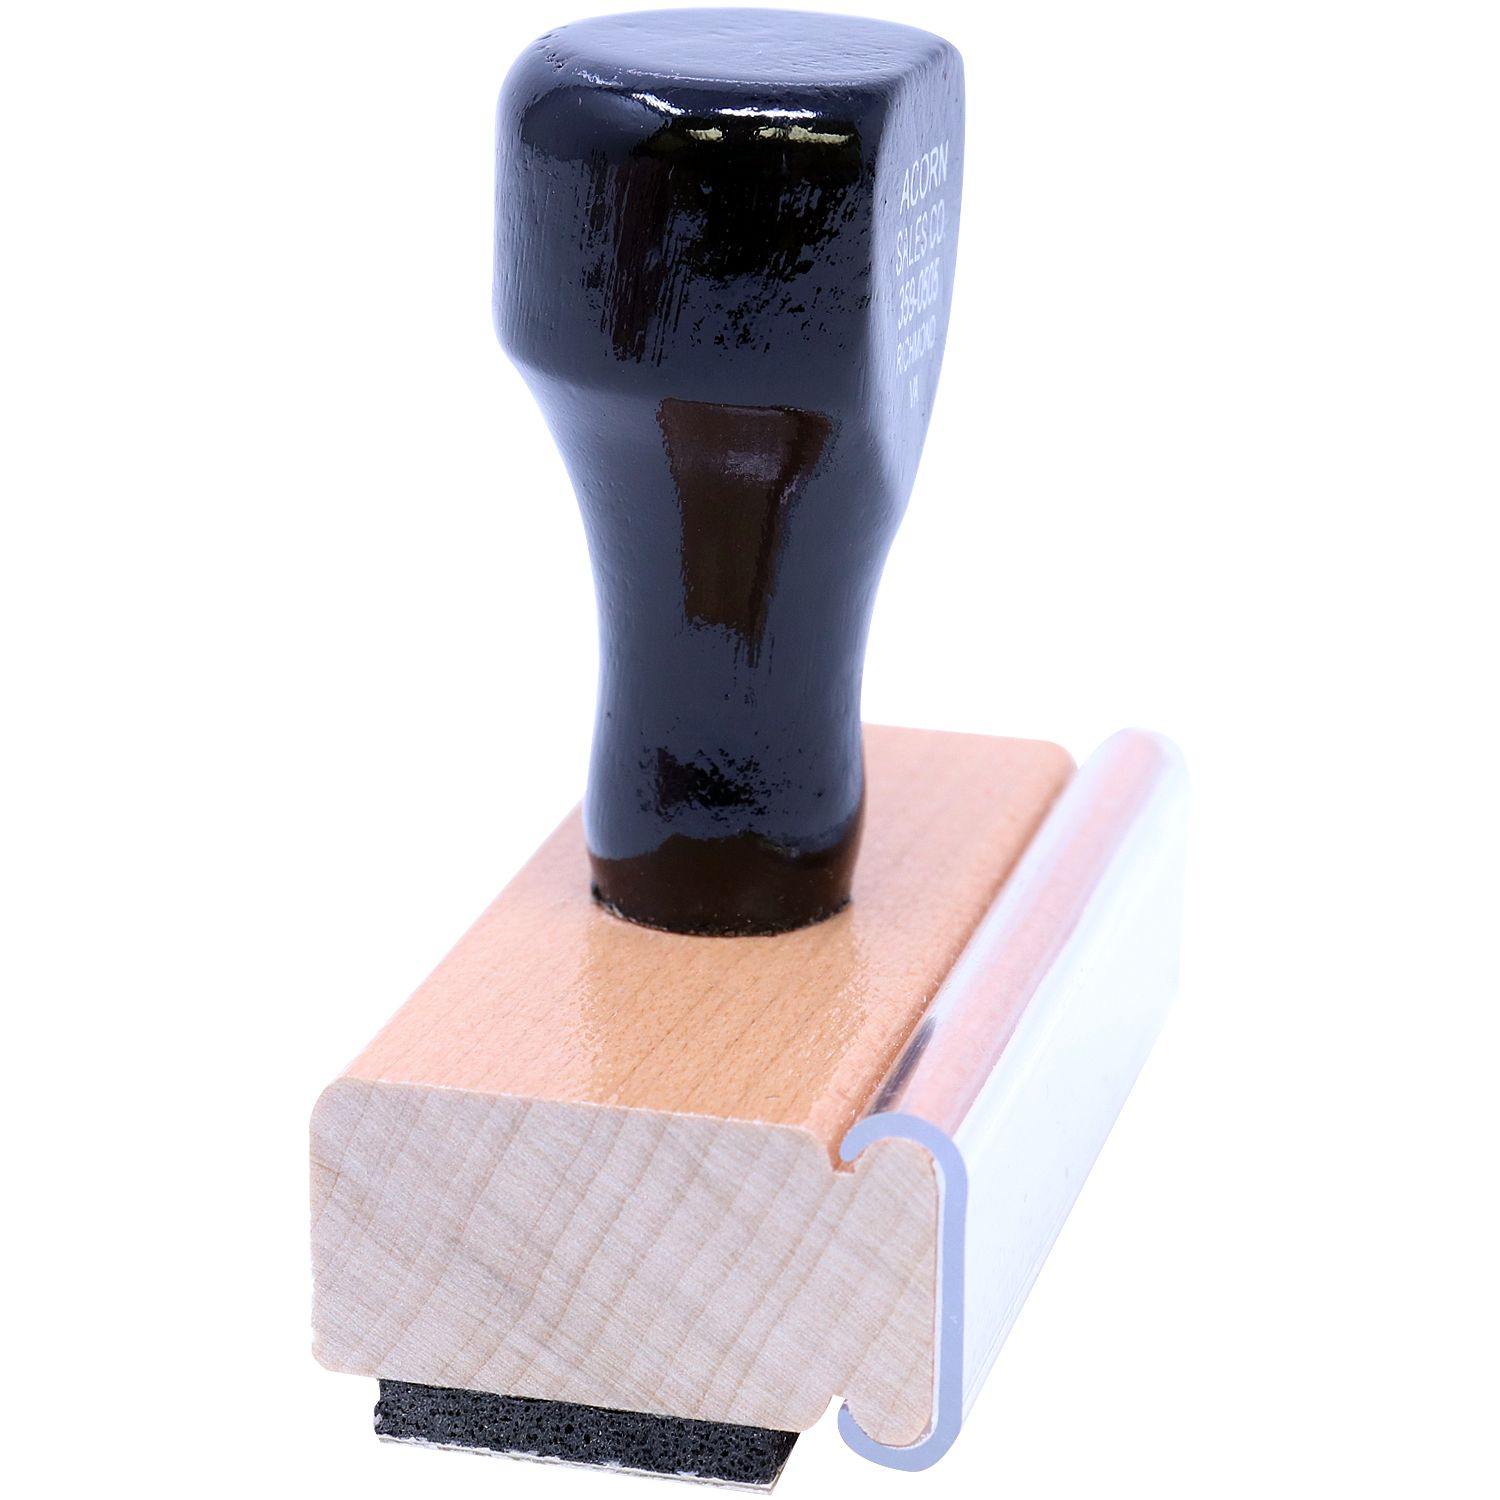 Side View of Large Narrow Font Return Receipt Requested Rubber Stamp at an Angle